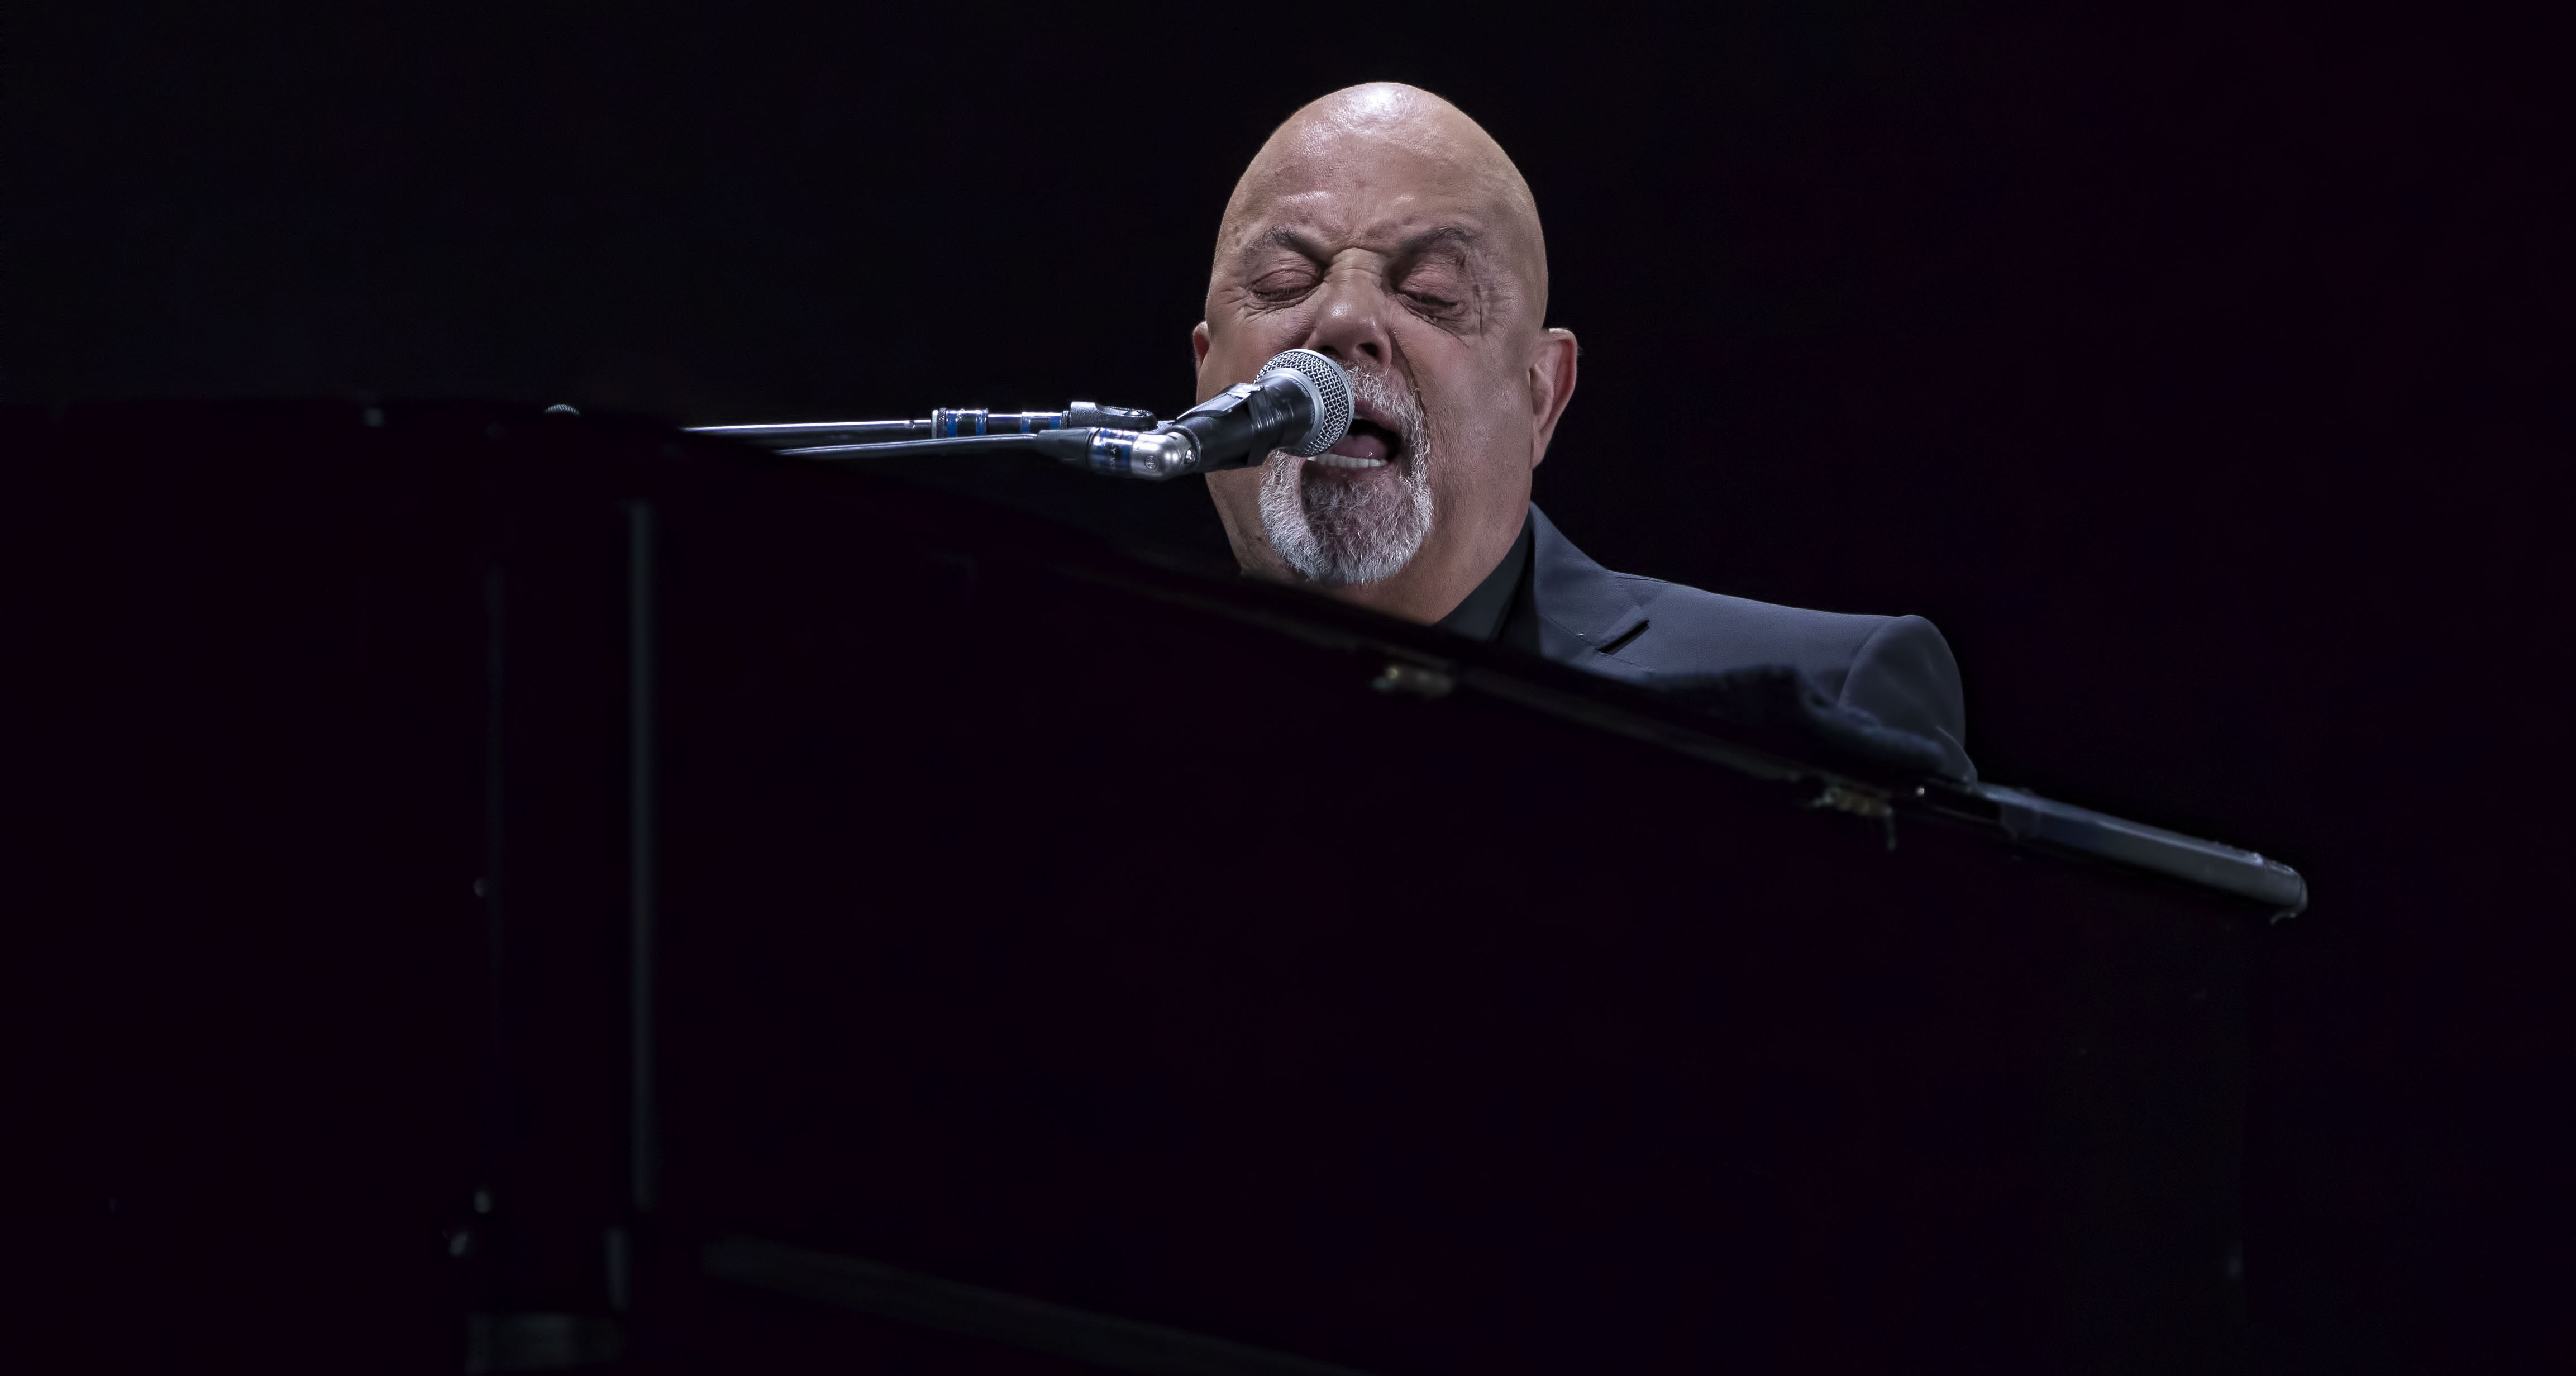 Billy Joel At Wrigley Field Chicago, IL - August 26, 2016 (Photo